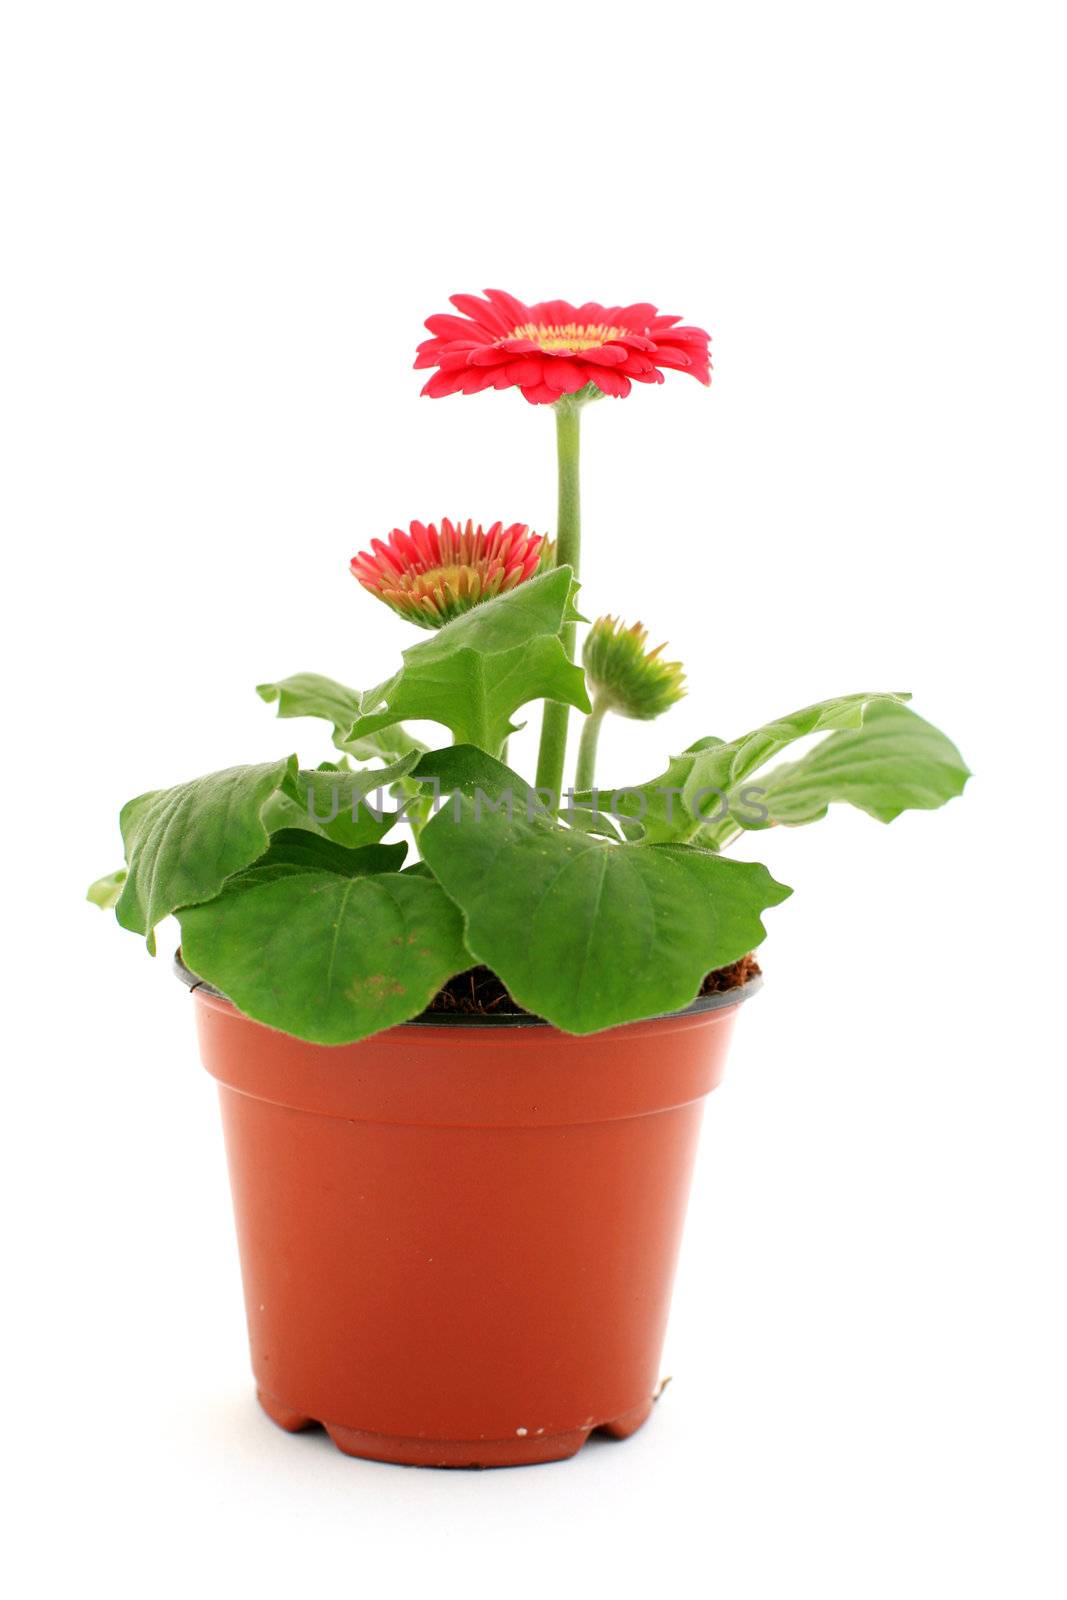 Red gerbera daisy plant in pot on white background 